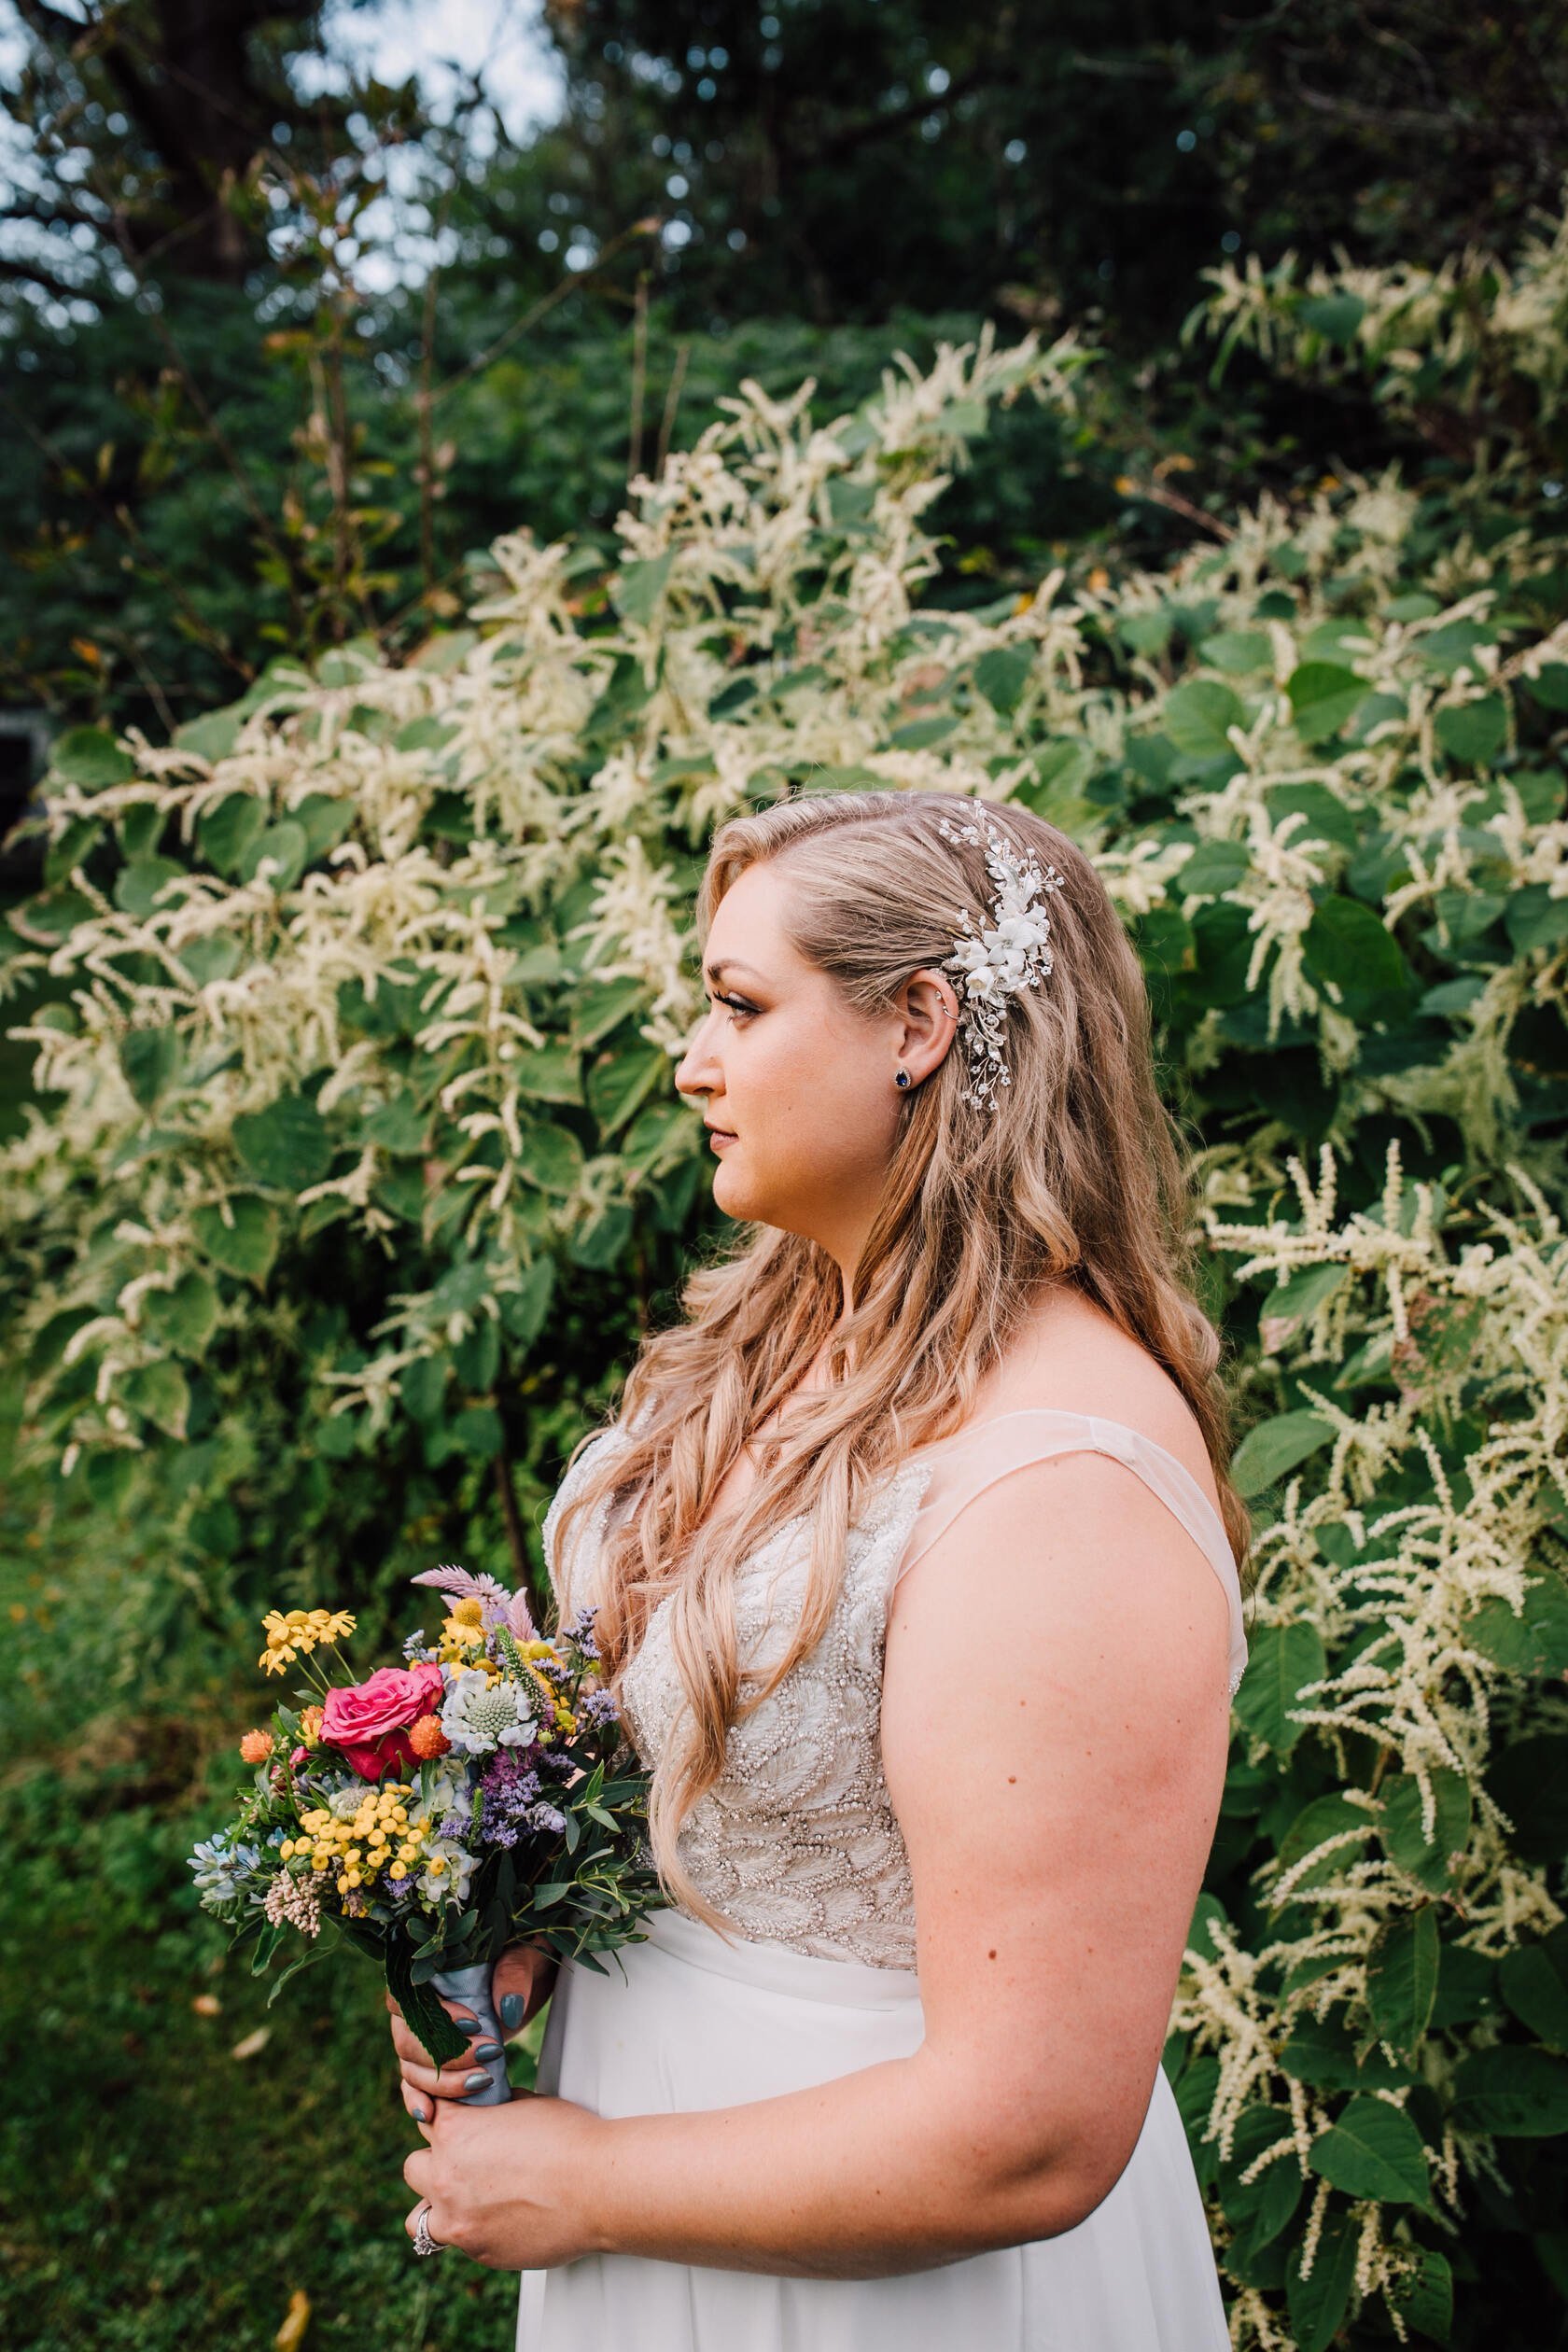  Bride’s side profile and bridal hair from a backyard wedding reception 